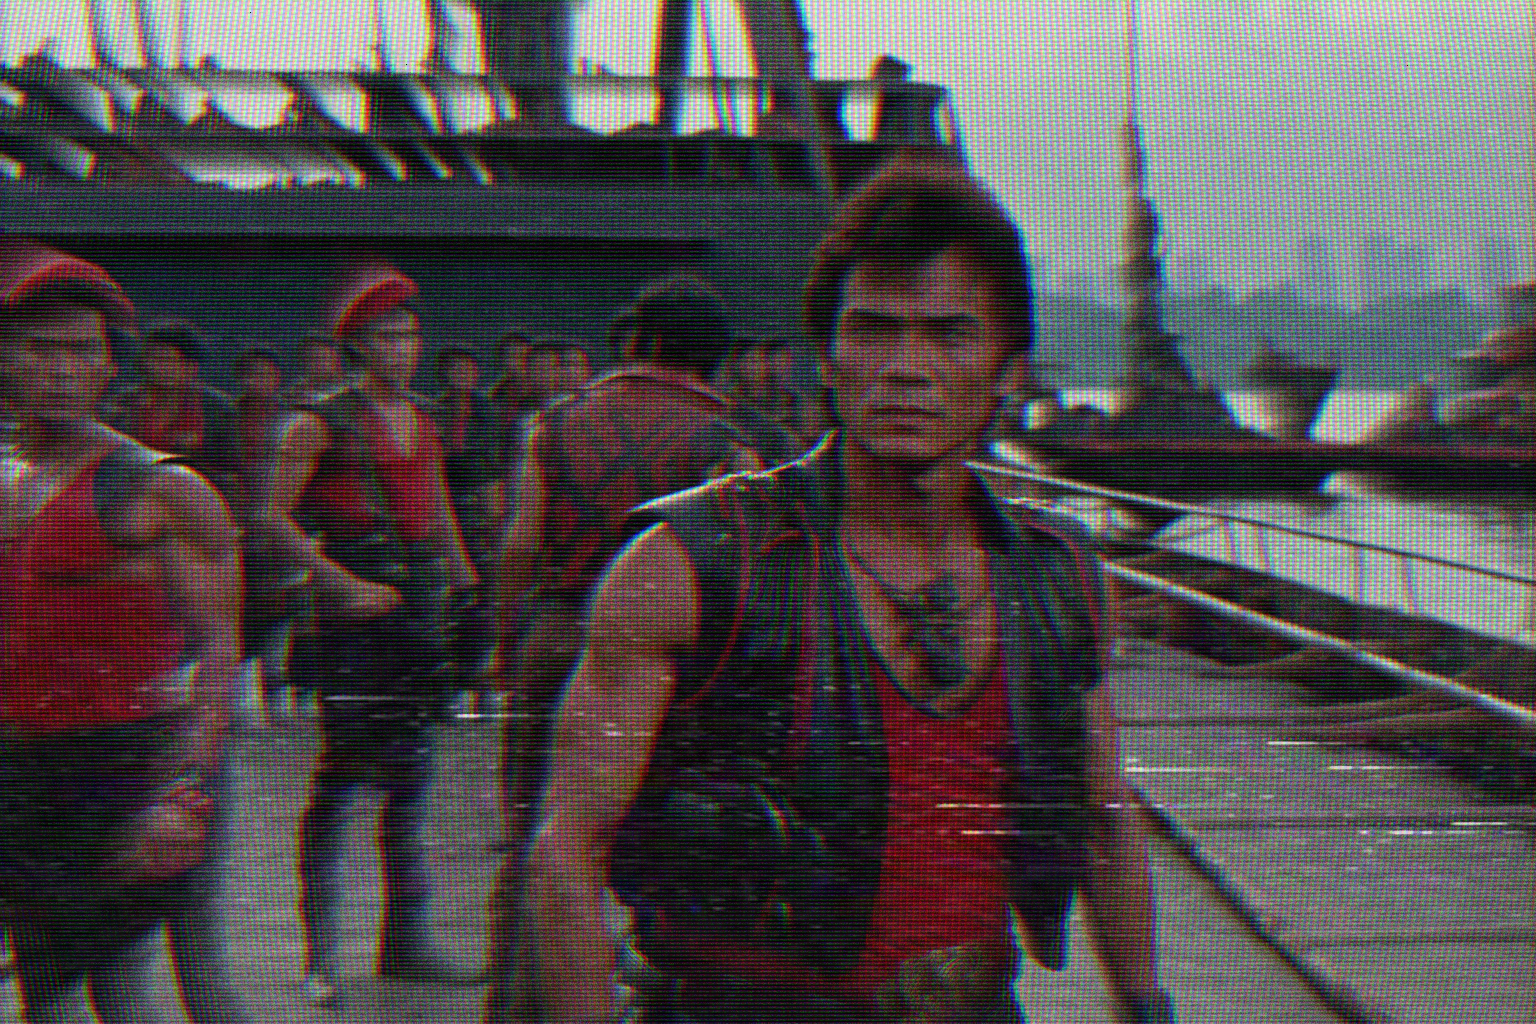 Bruce Lee and his merry crew of privateers